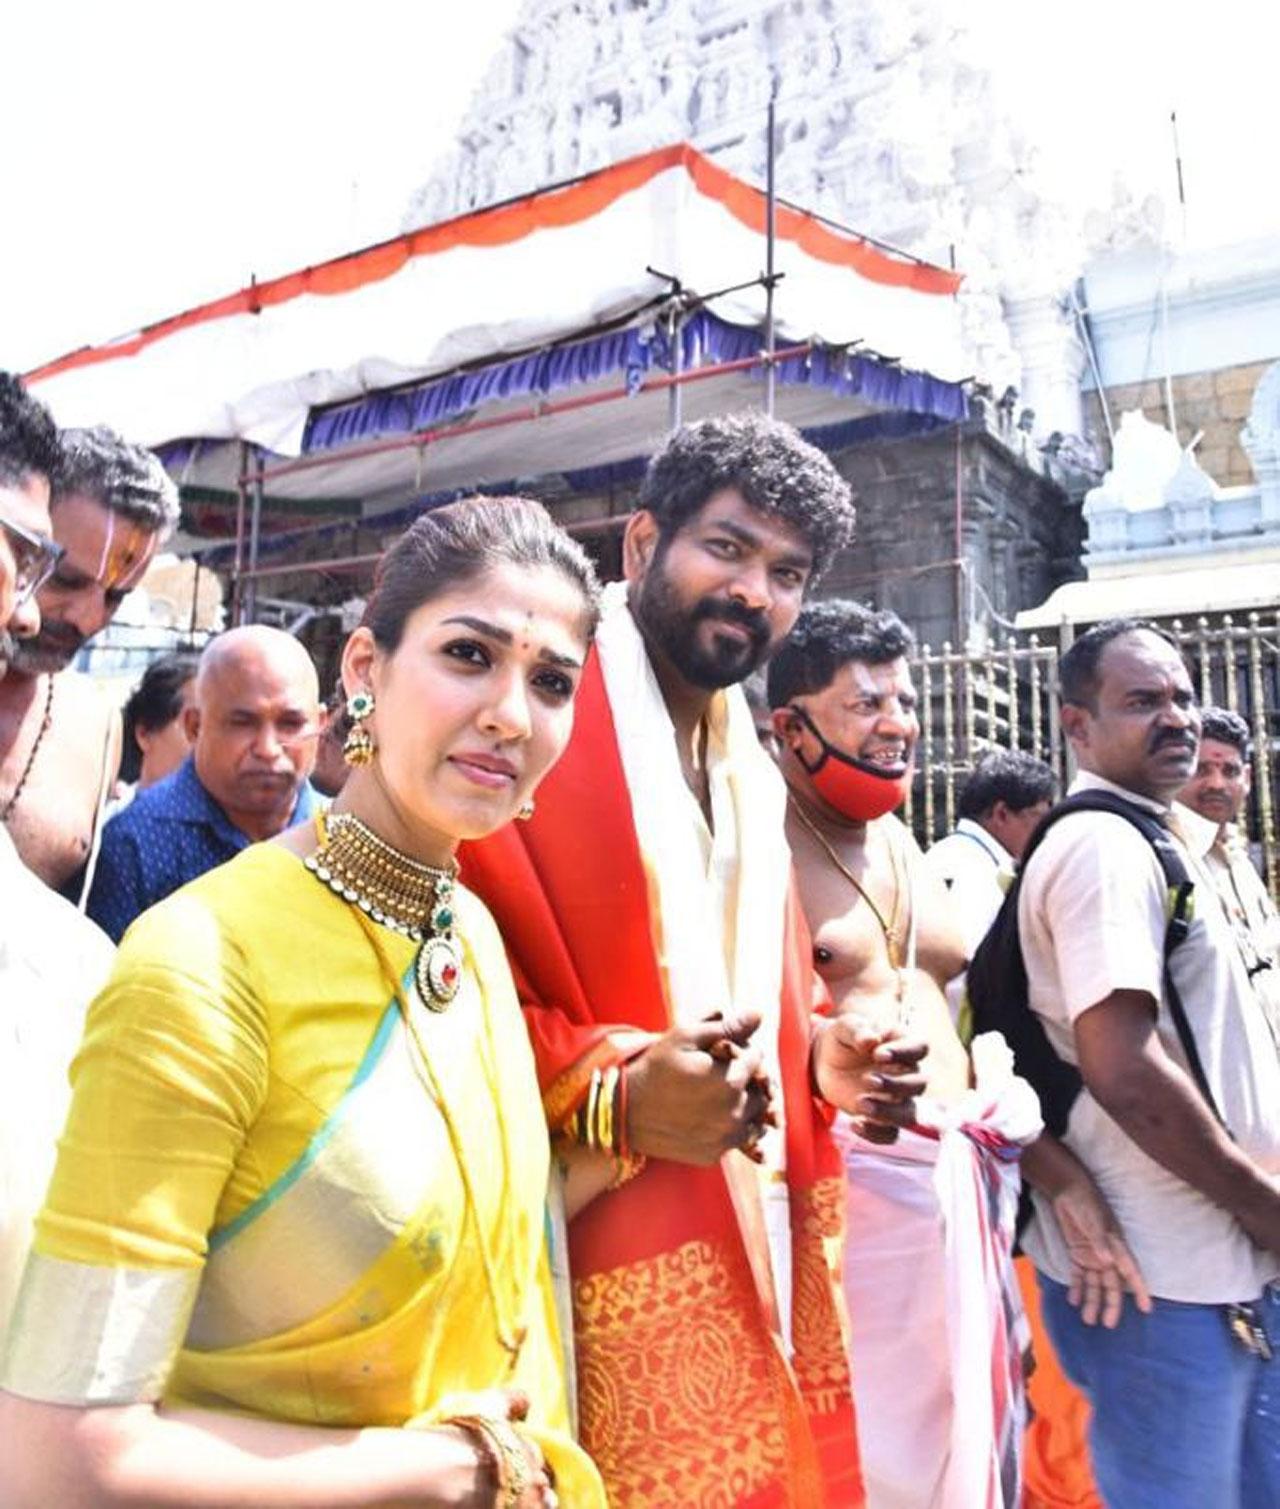 Newly weds Nayanthara and Vignesh Shivan paid a visit to the Tirumala temple to seek blessings. The couple, after years of being together, tied the knot in an intimate ceremony on June 9